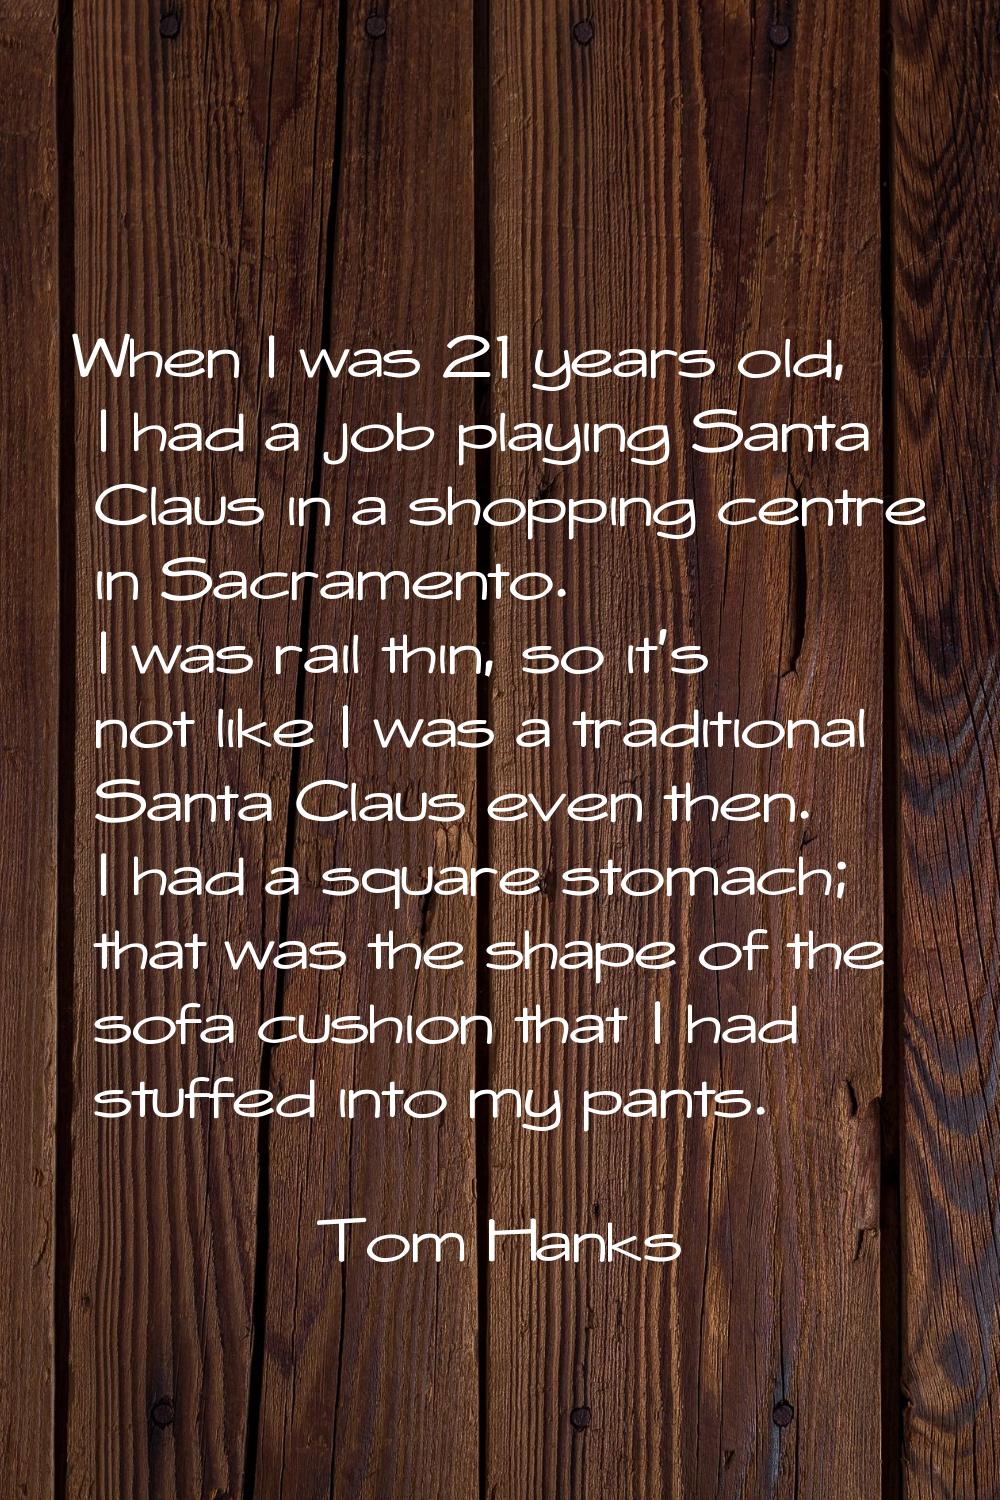 When I was 21 years old, I had a job playing Santa Claus in a shopping centre in Sacramento. I was 